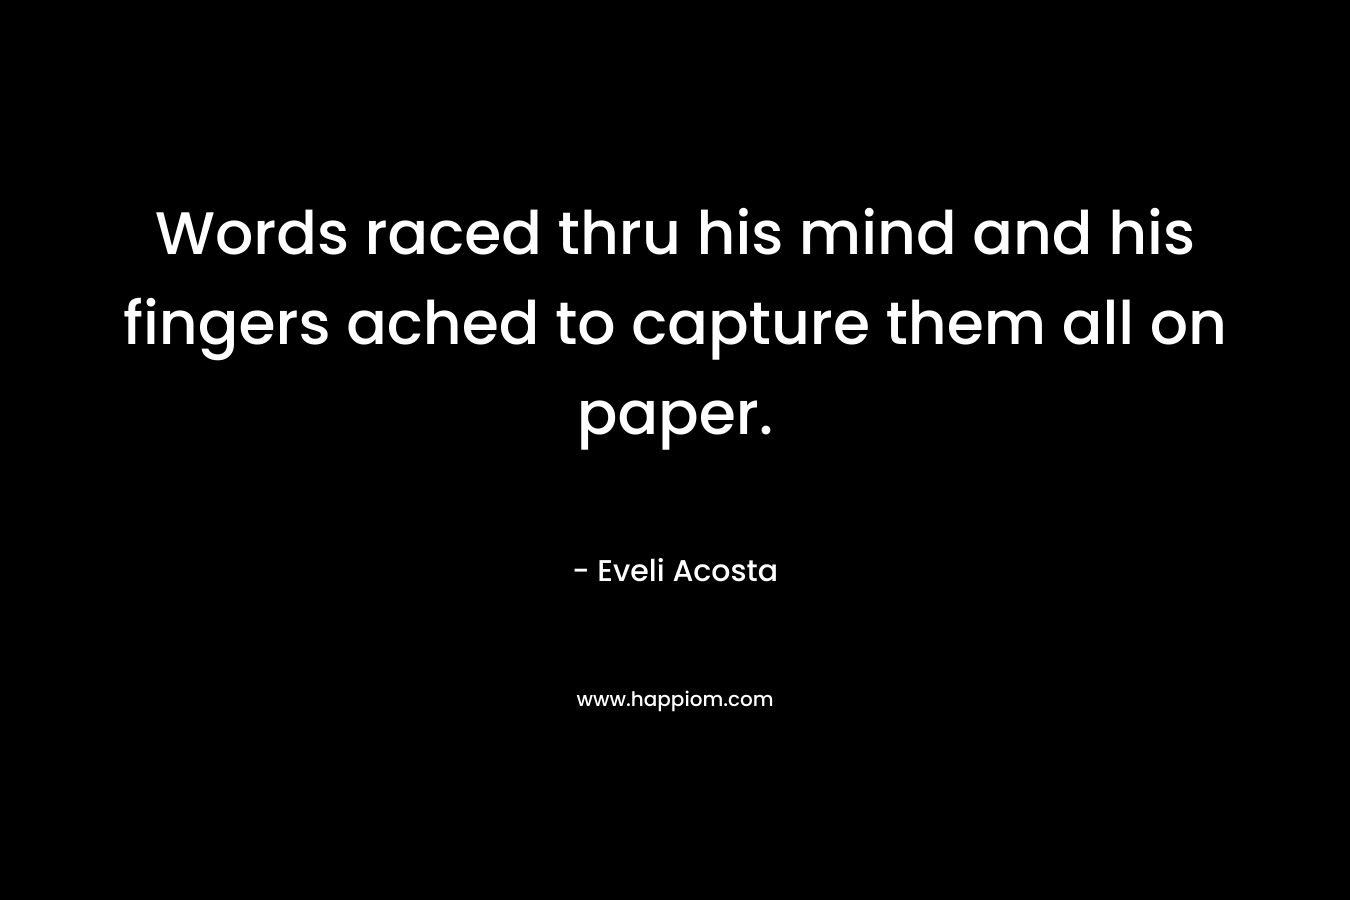 Words raced thru his mind and his fingers ached to capture them all on paper. – Eveli Acosta